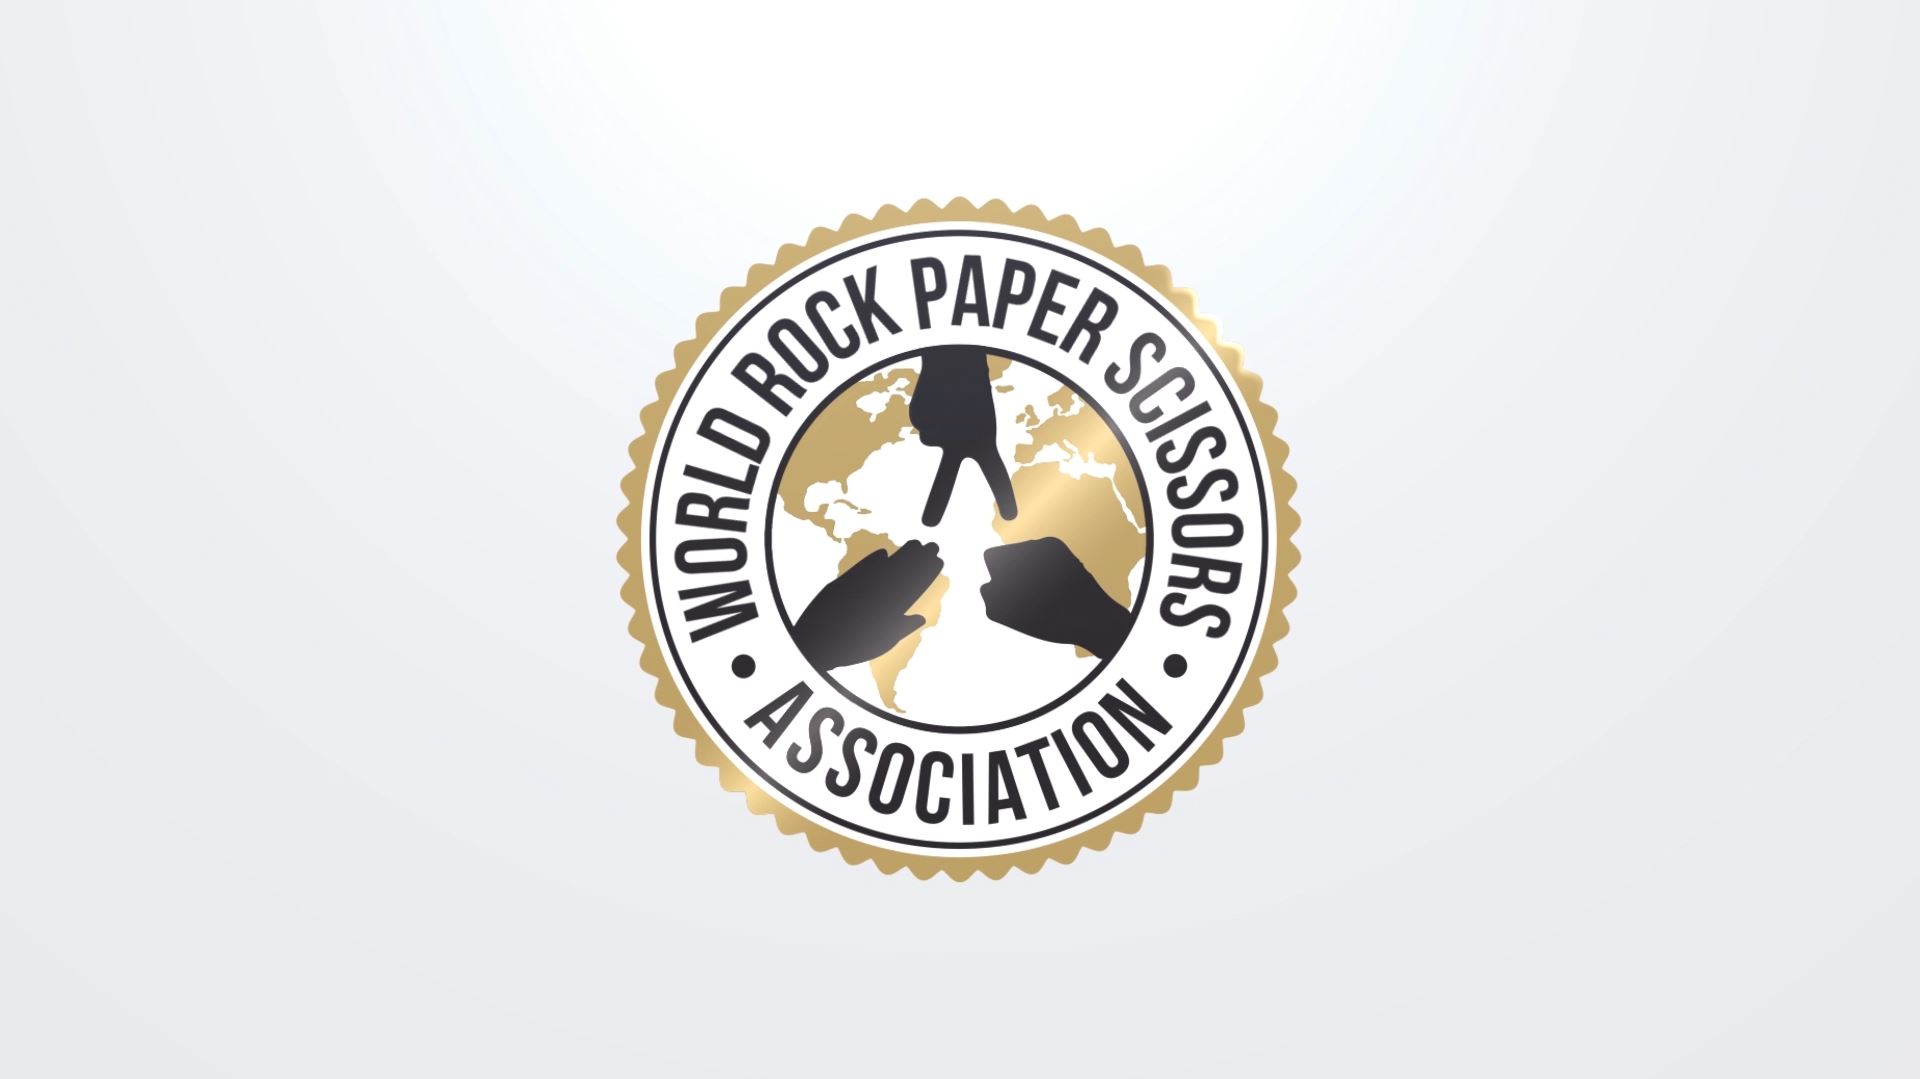 The Official History of Rock Paper Scissors - World Rock Paper